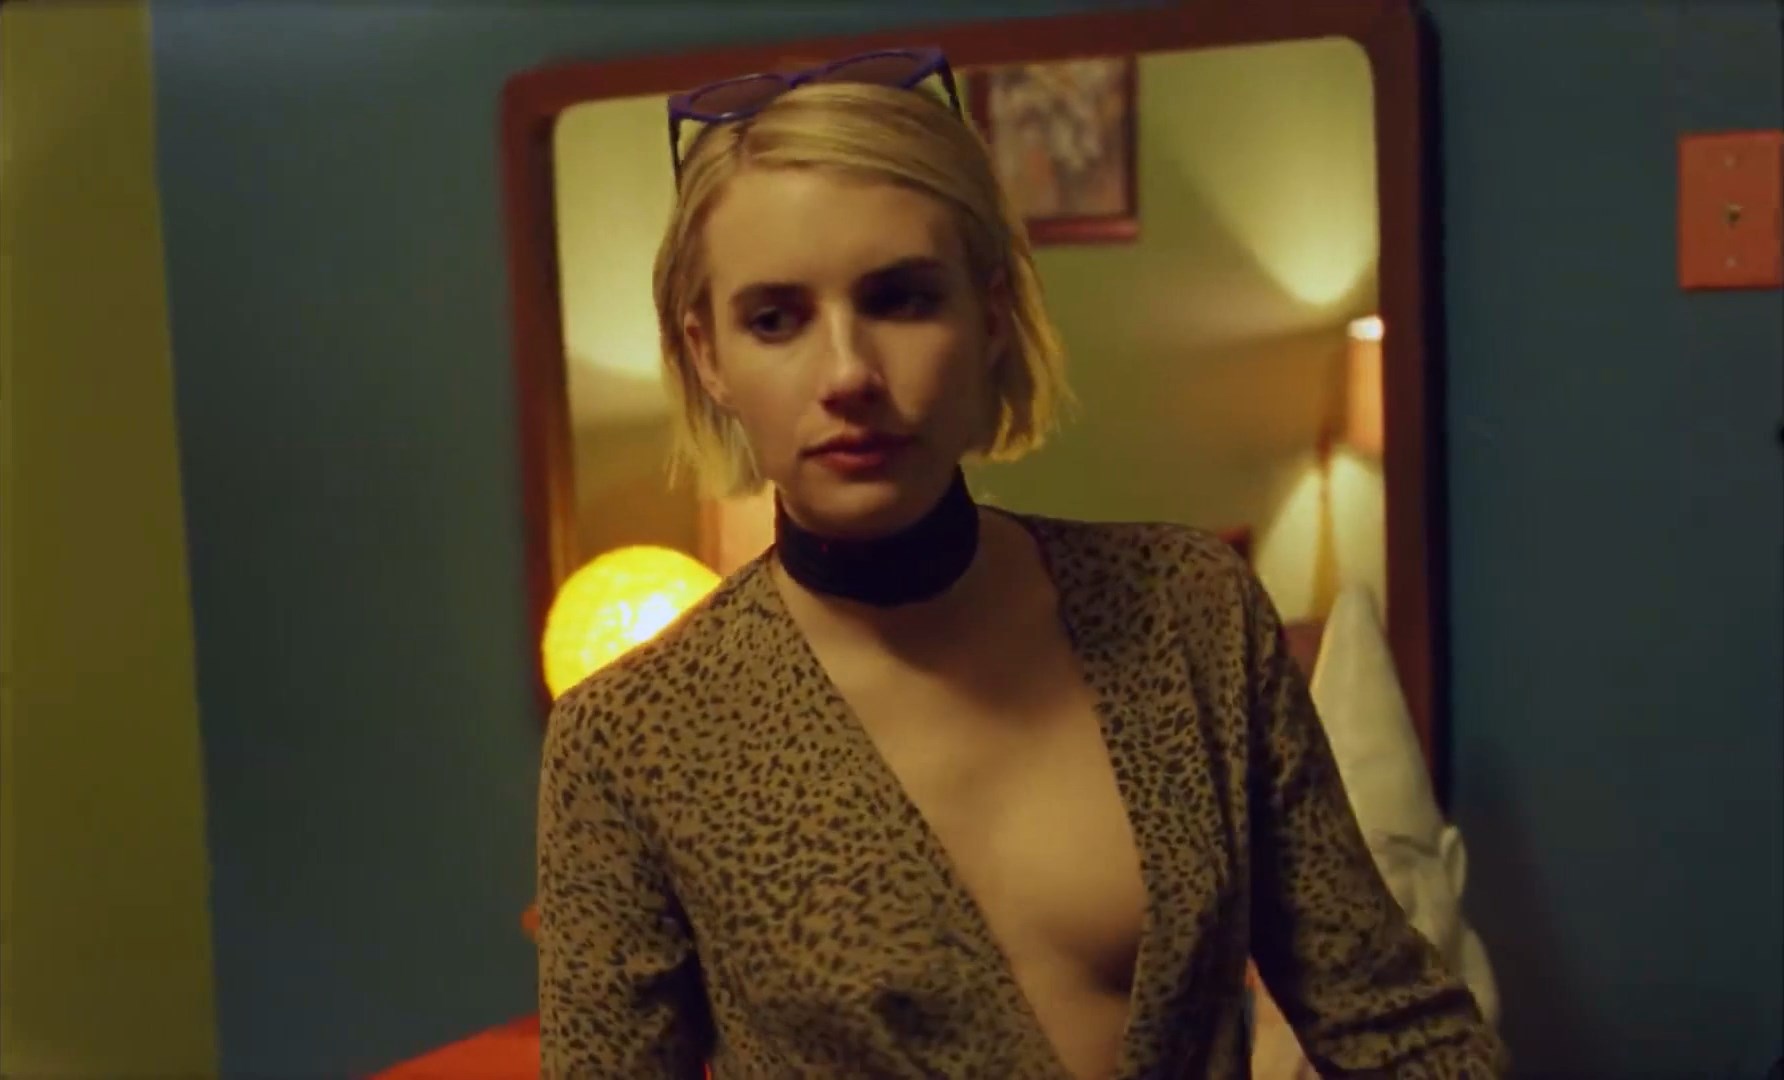 Emma Roberts - Time of Day (2018) HD 1080p.